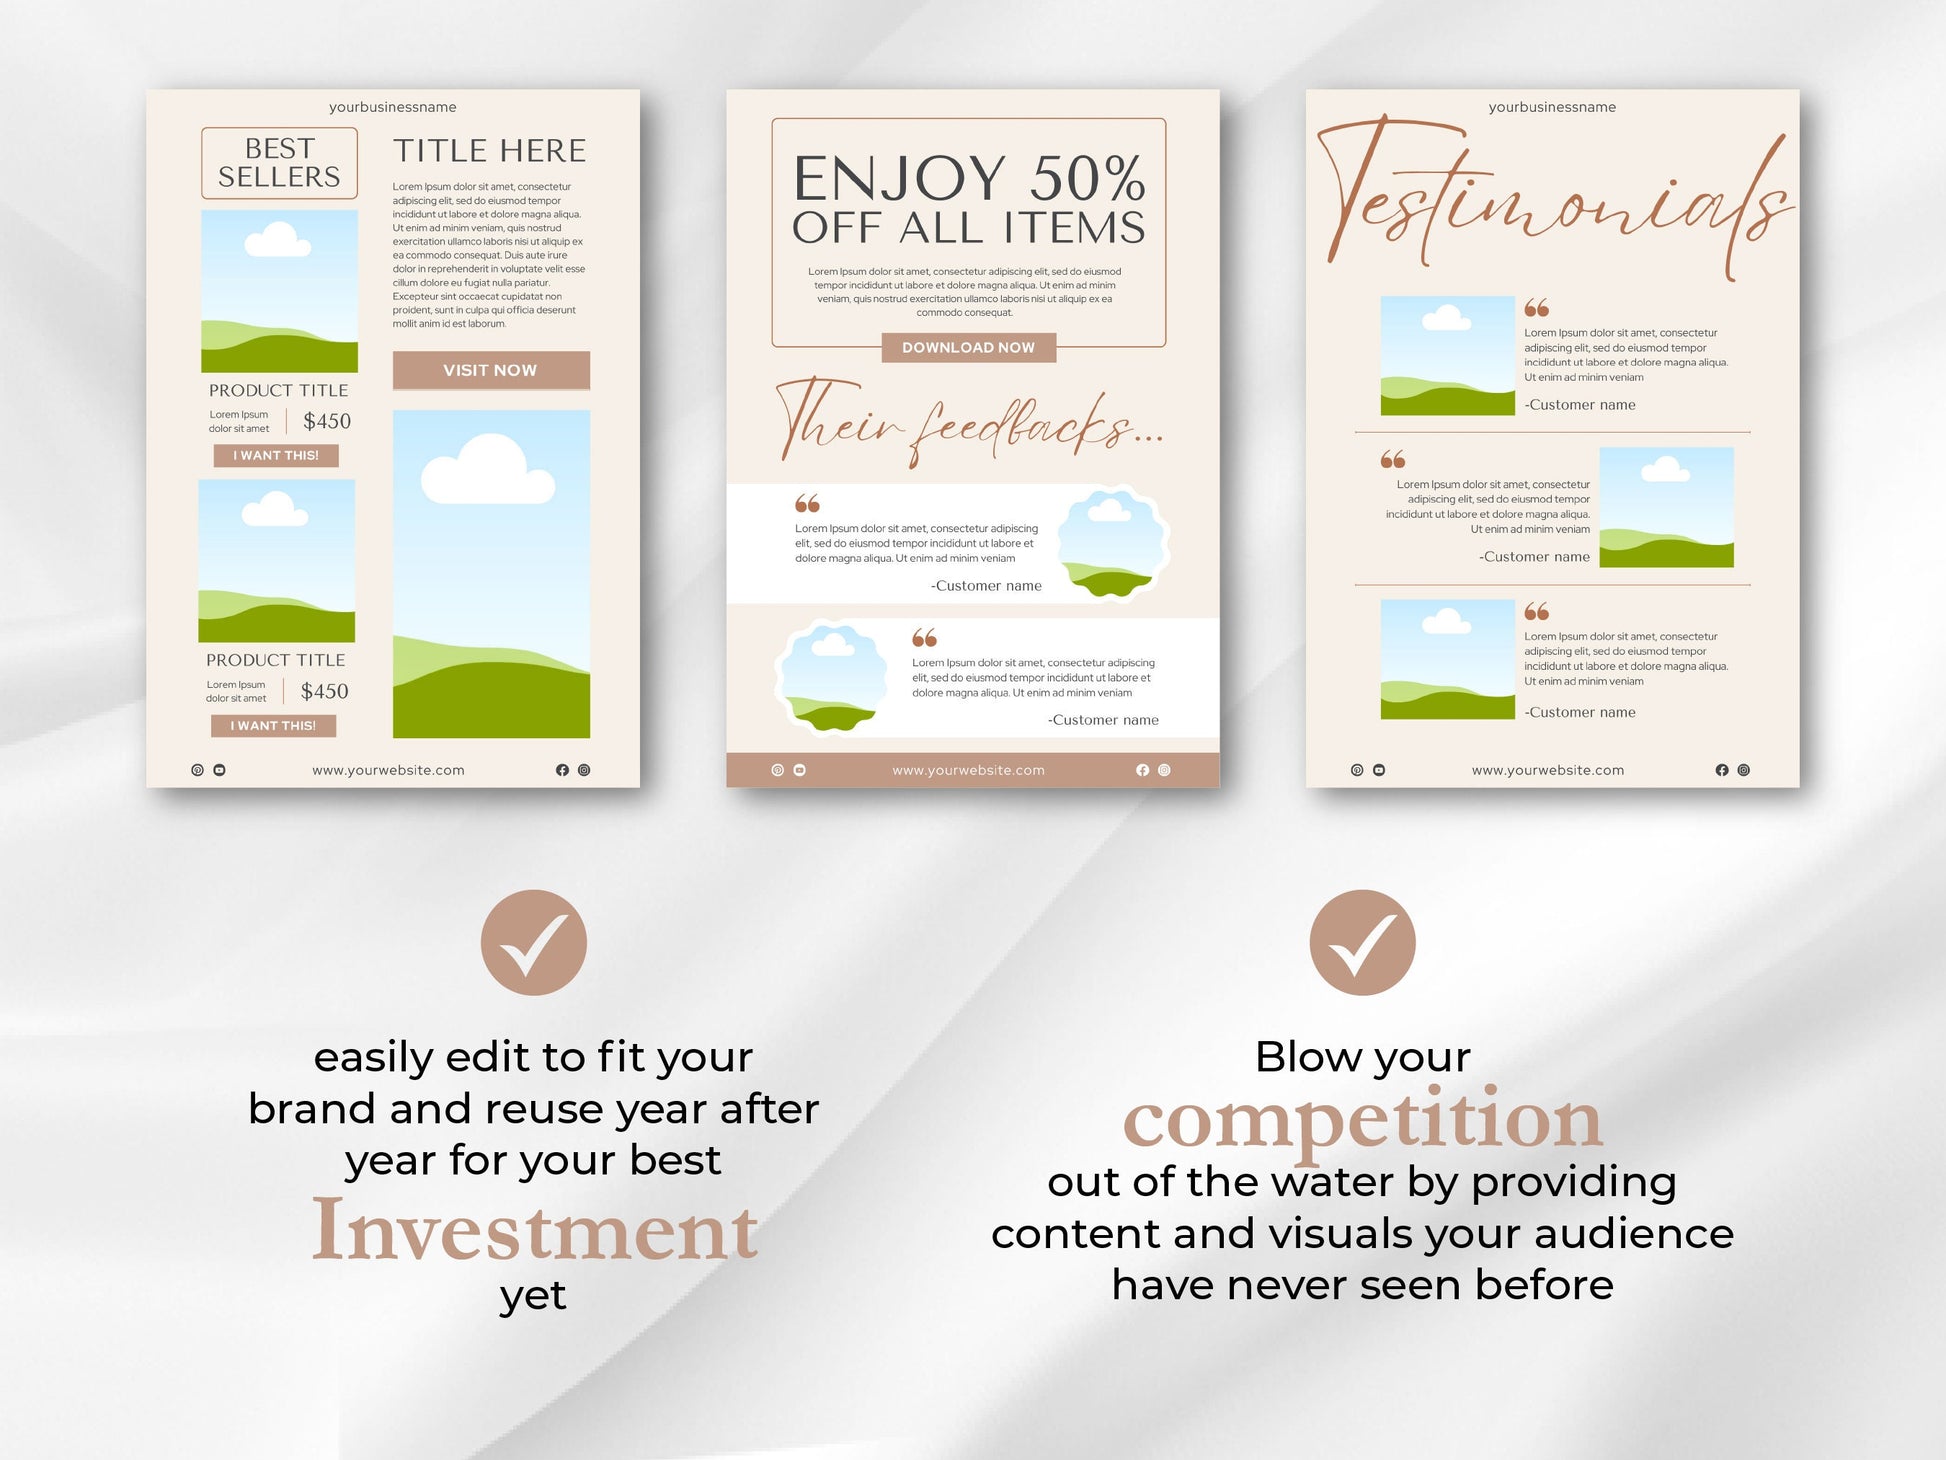 Email Marketing Canva Template, Newsletter Template Kit, Sales Email Template, Mailchimp email templates, Mailchimp Marketing Template